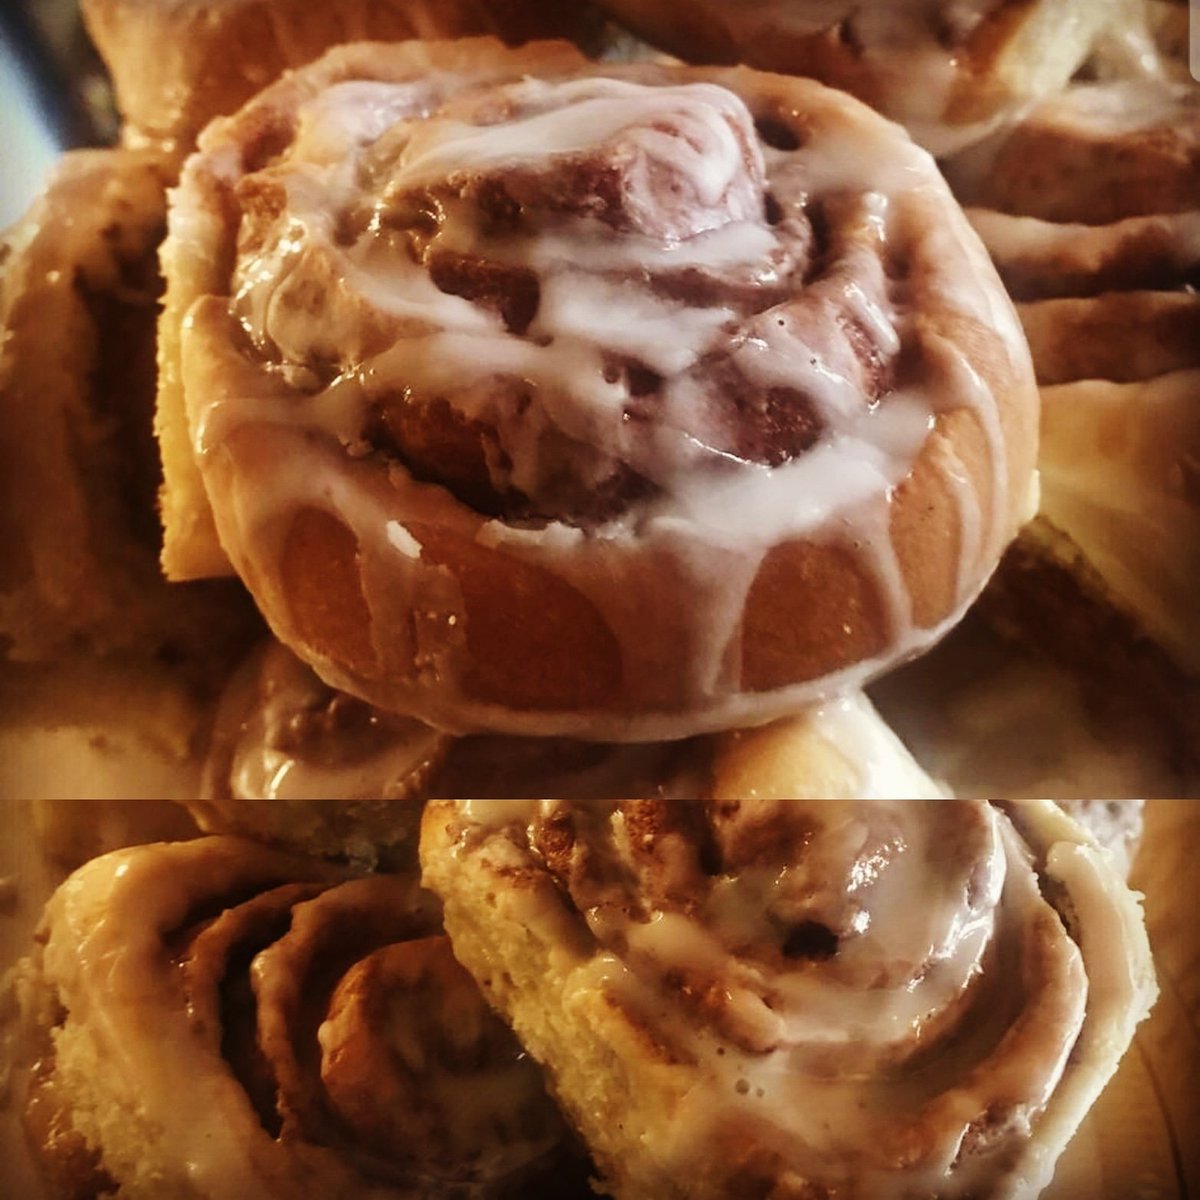 We got cinnamon rolls ya'll! Hot, fresh and baked from scratch. These are new here at Kia's Cakes so if you get one tweet it and let us know how you like it!
#cinnamonrolls #hotnfresh #theonlygoodrollisacinnamonroll #foodie #phillybakery #delcobakery #breakfastindelco #wheretoeat